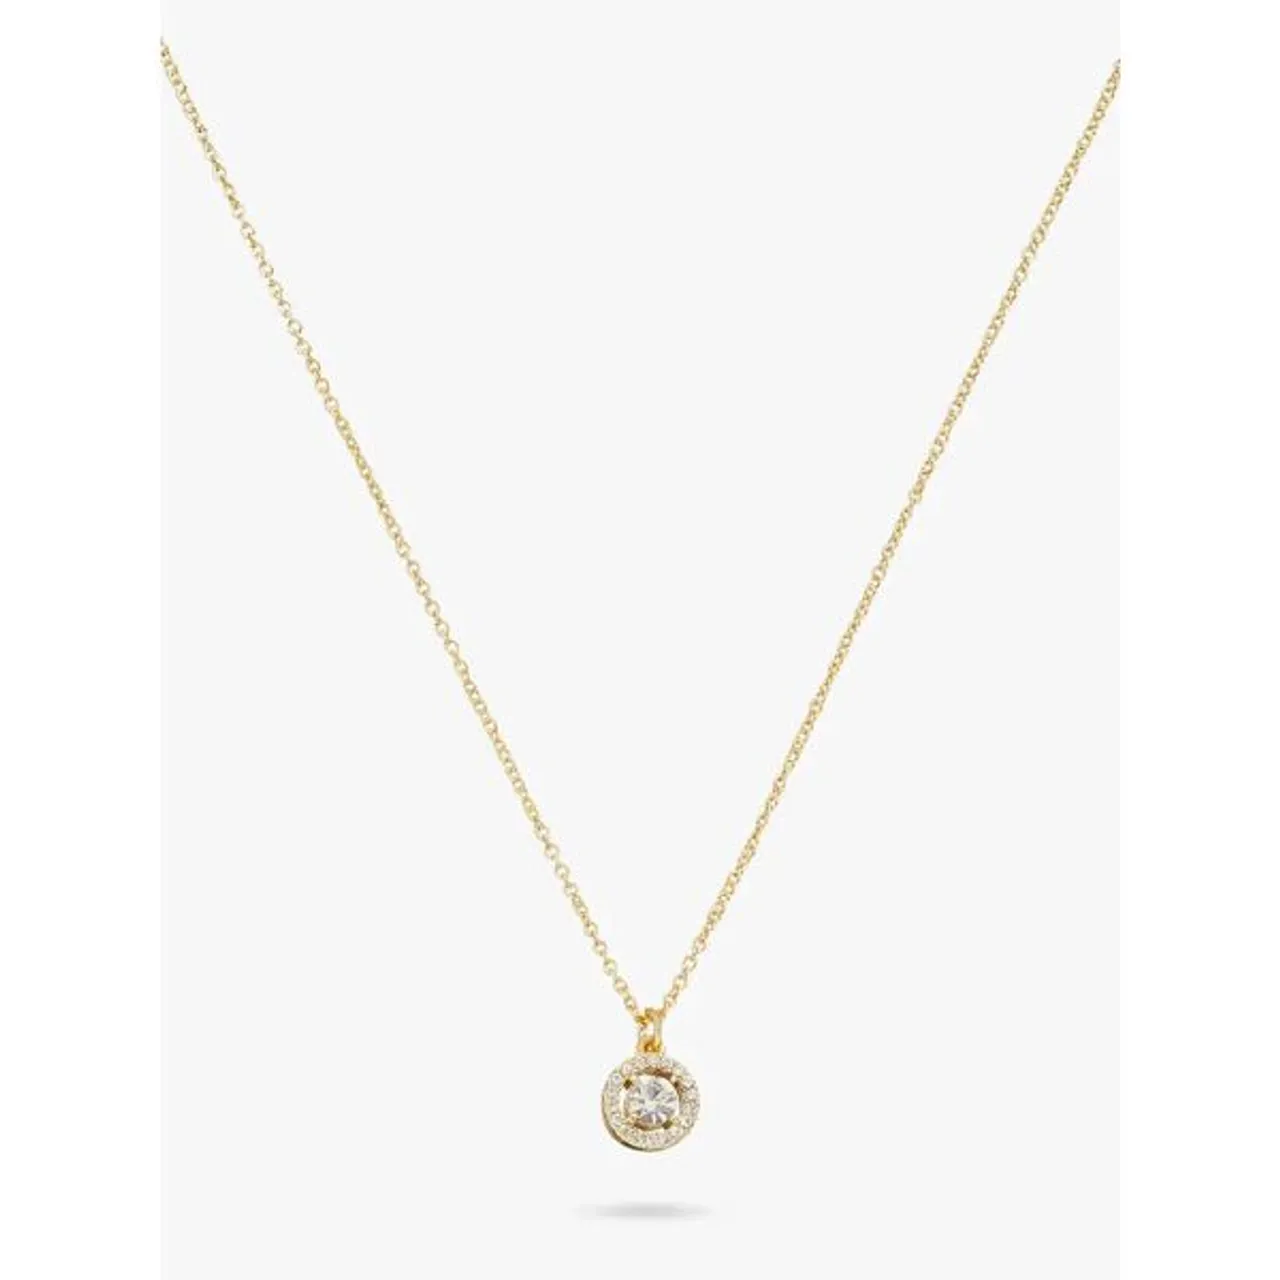 Coach Crystal Halo Pave Pendant Necklace, Gold - Gold - Female